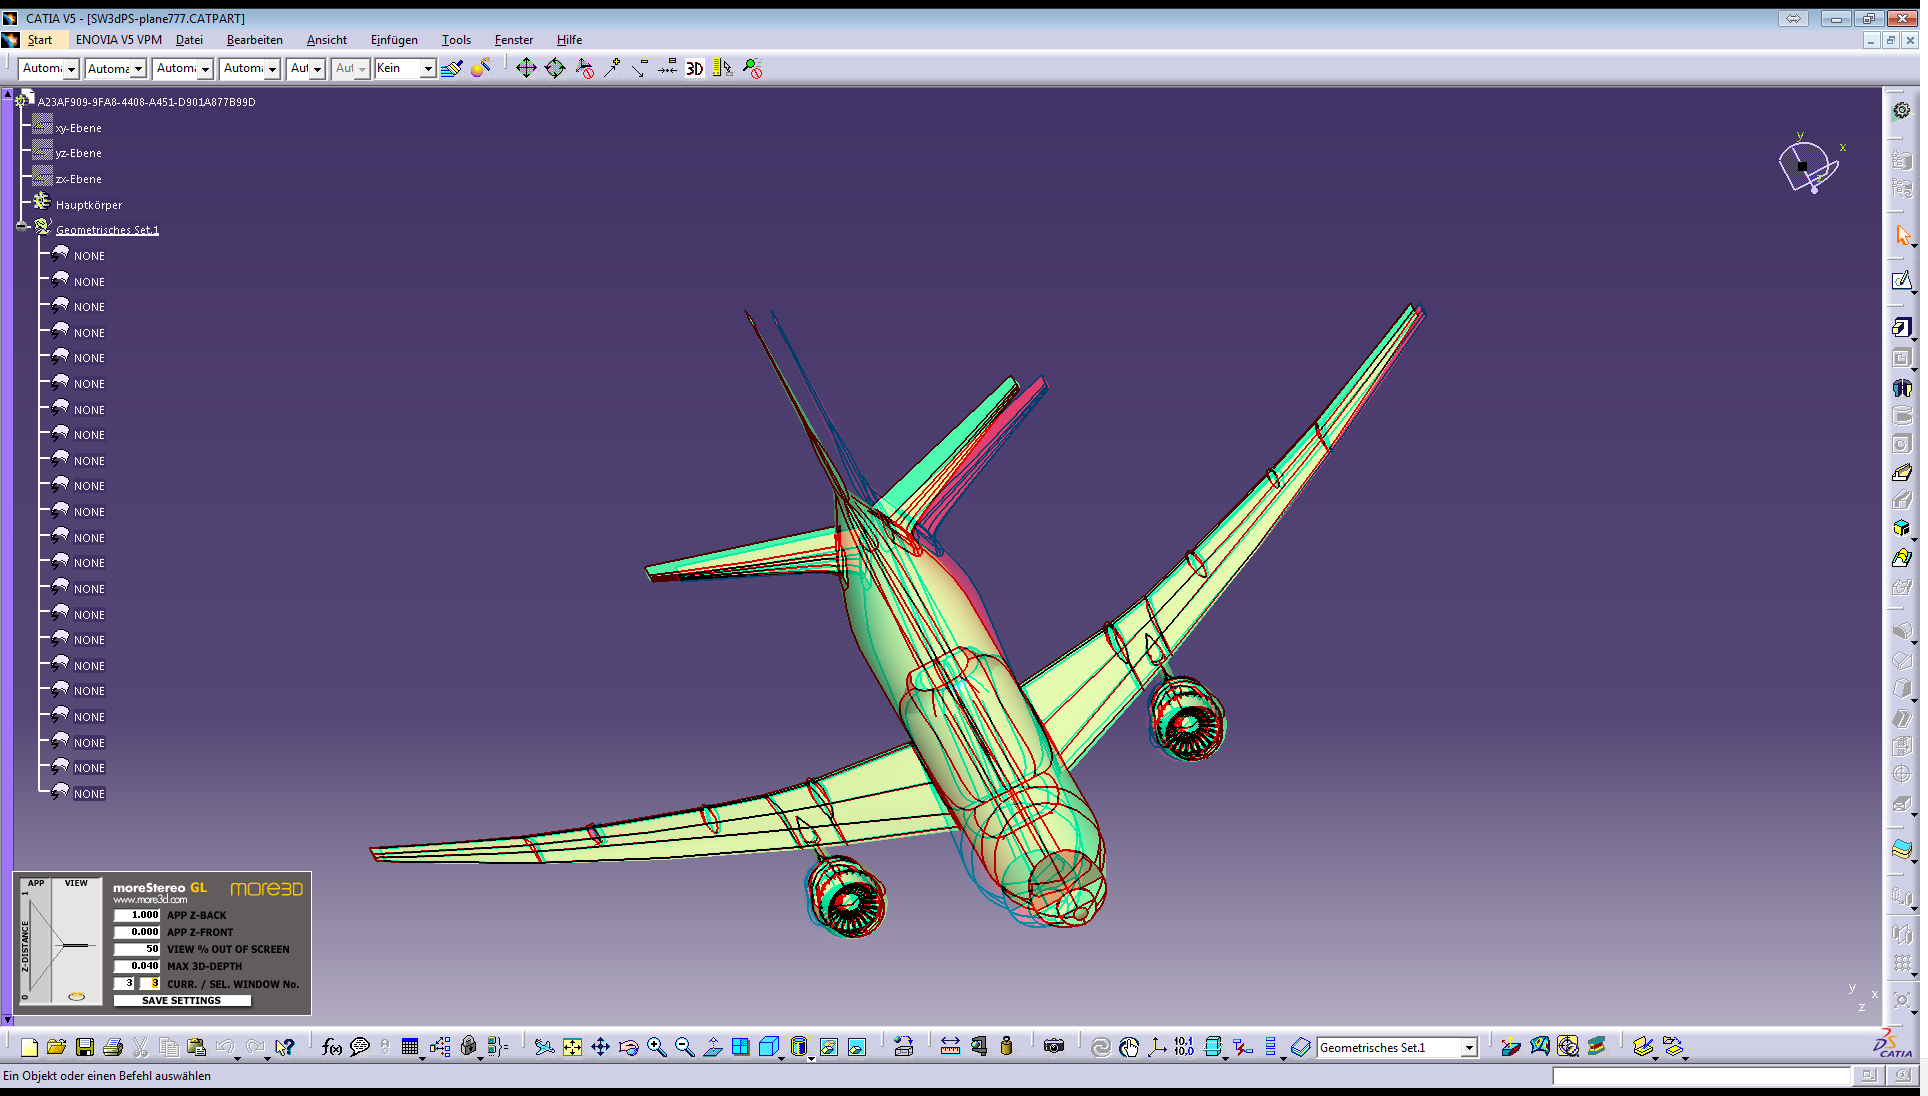 Catia V5 in 3D Stereo for 3D Projectors, 3D Displays, 3D TVs and Autostereoscopic Displays